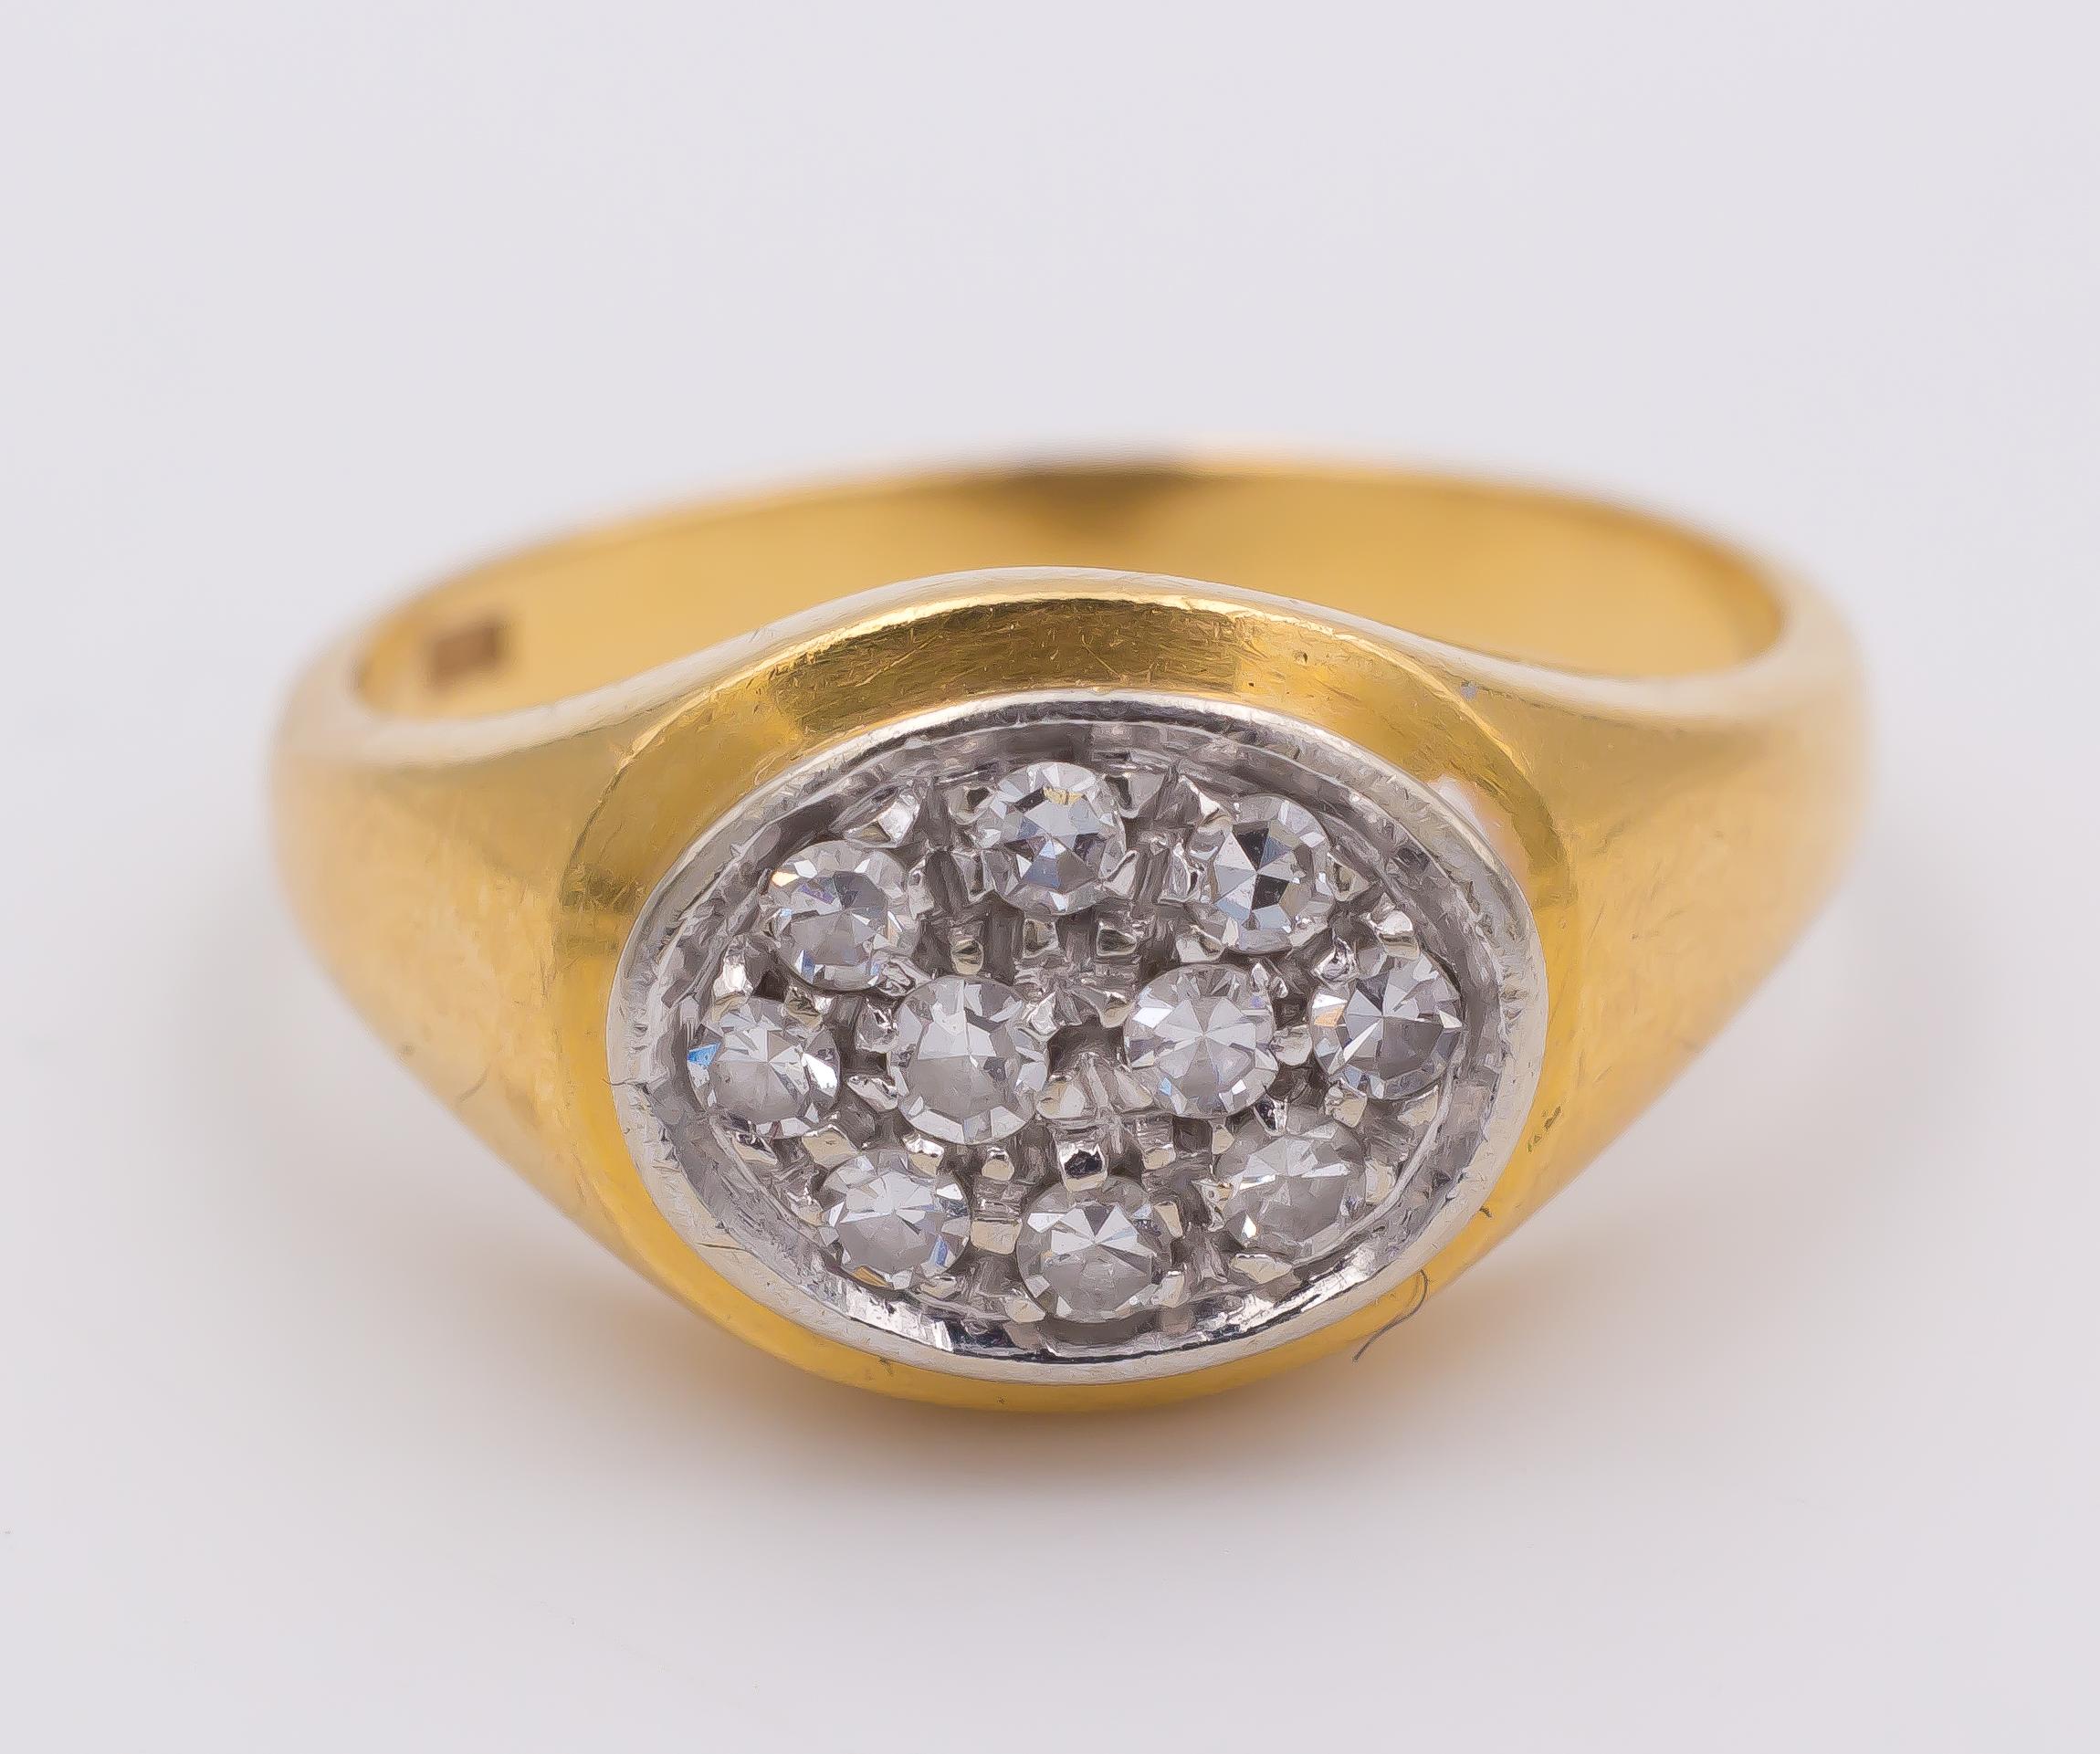 A simple but elegant vintage ring: the head is set with ten huit-huit cut diamonds and the ring is crafted in 18K gold throughout. 
Its sleek profile and its shape make this ring perfect for both a woman and a man's hand.  

MATERIALS
18K gold and